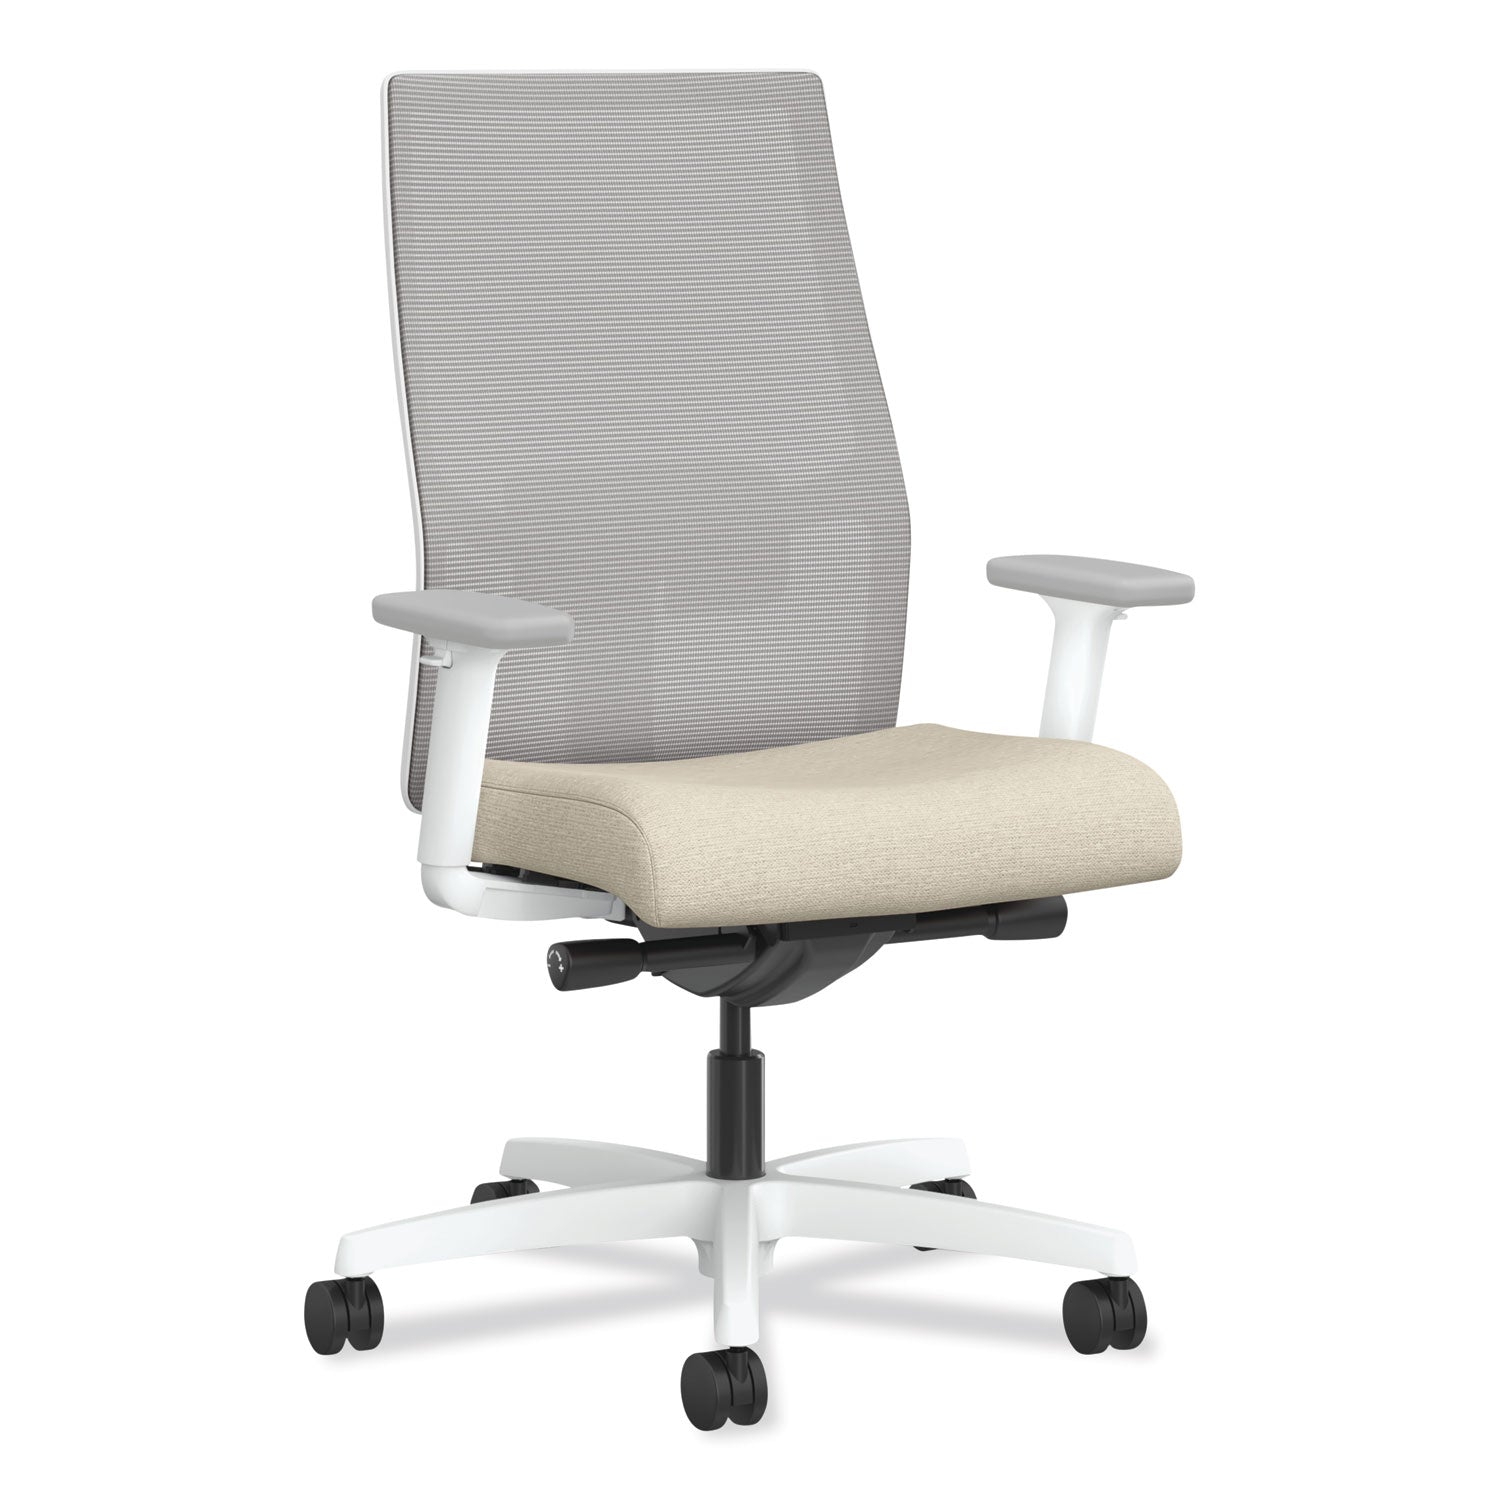 ignition-20-4-way-stretch-mid-back-task-chair-white-adjustable-lumbar-support-biscotti-fog-white-ships-in-7-10-bus-days_honi2mm2afh11wx - 1